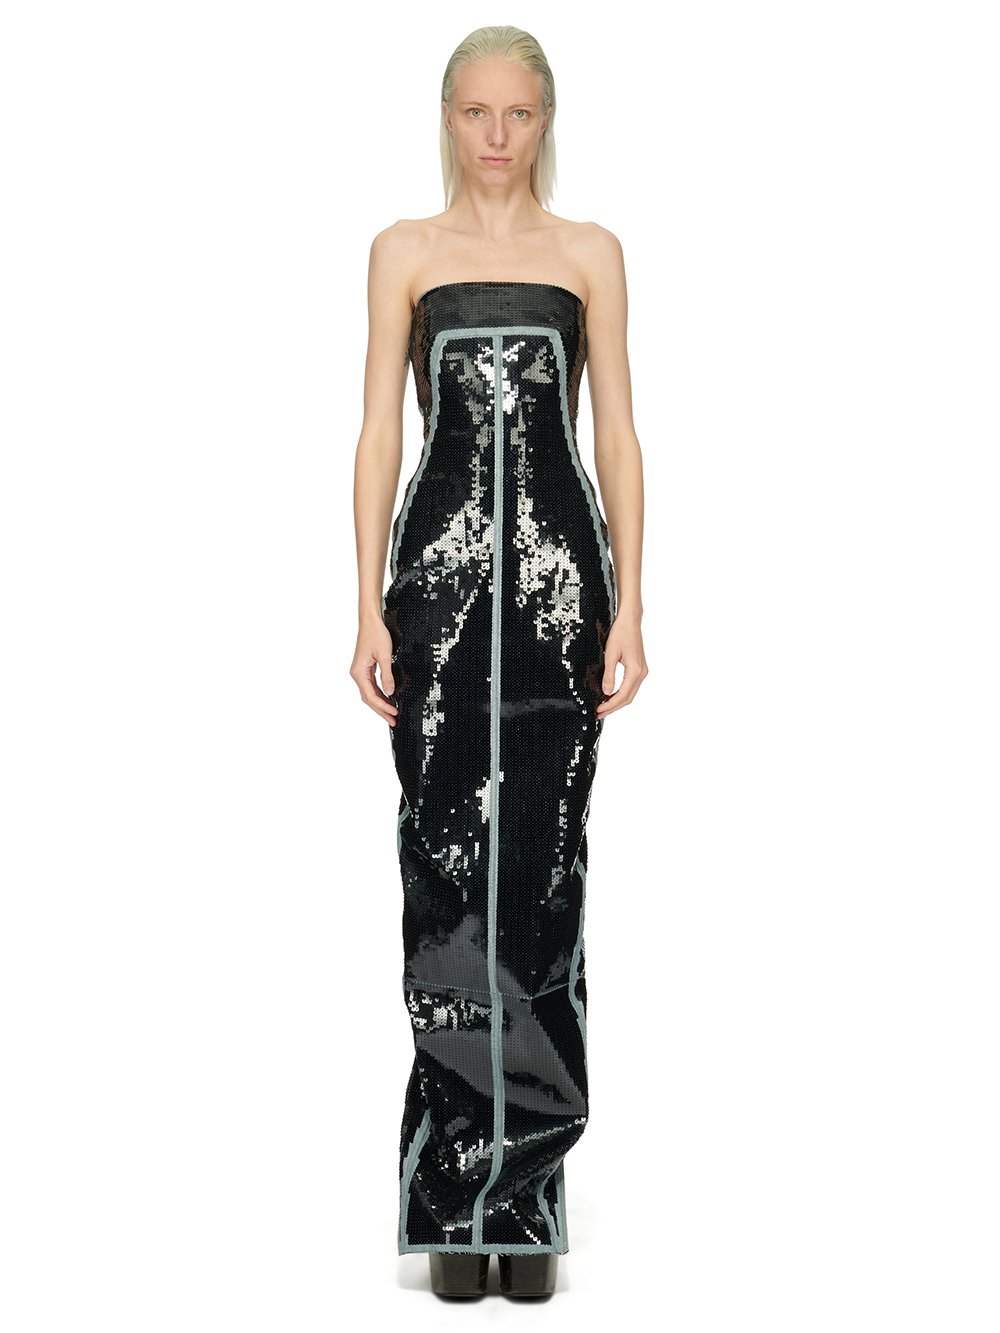 RICK OWENS FW23 LUXOR BUSTIER GOWN IN BLUE AND BLACK SEQUIN EMBROIDERED STRETCH DENIM 